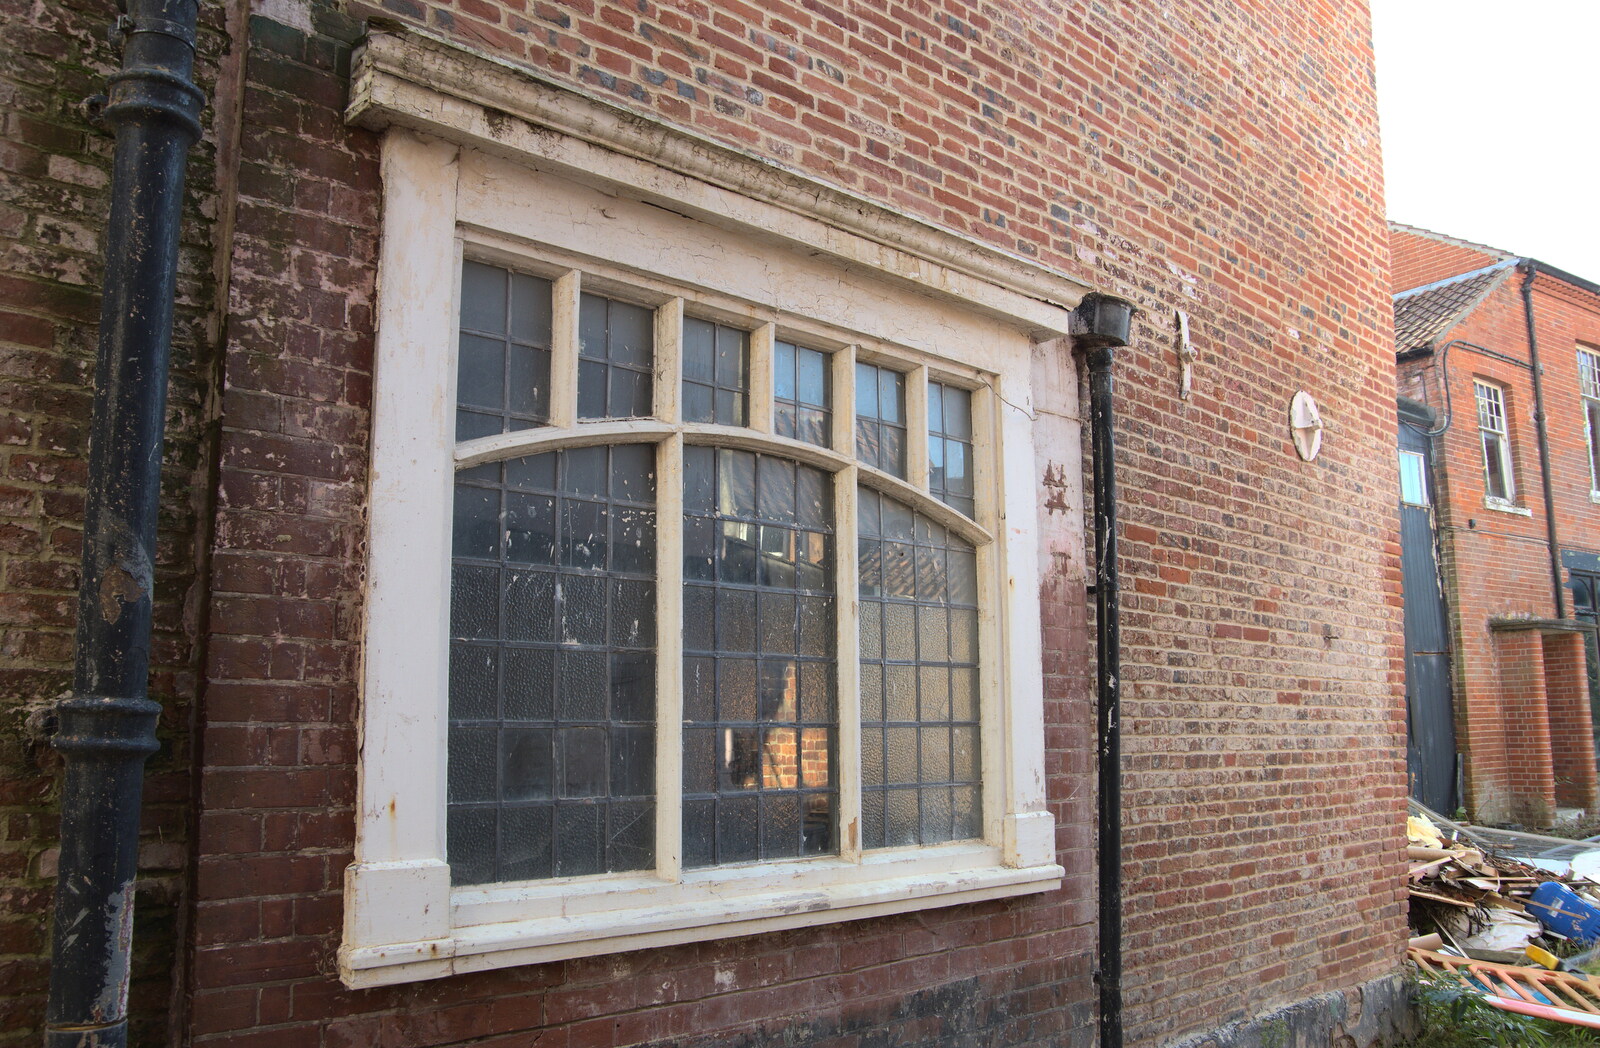 A Postcard from Bungay, Suffolk - 2nd November 2022: There's a nice original window